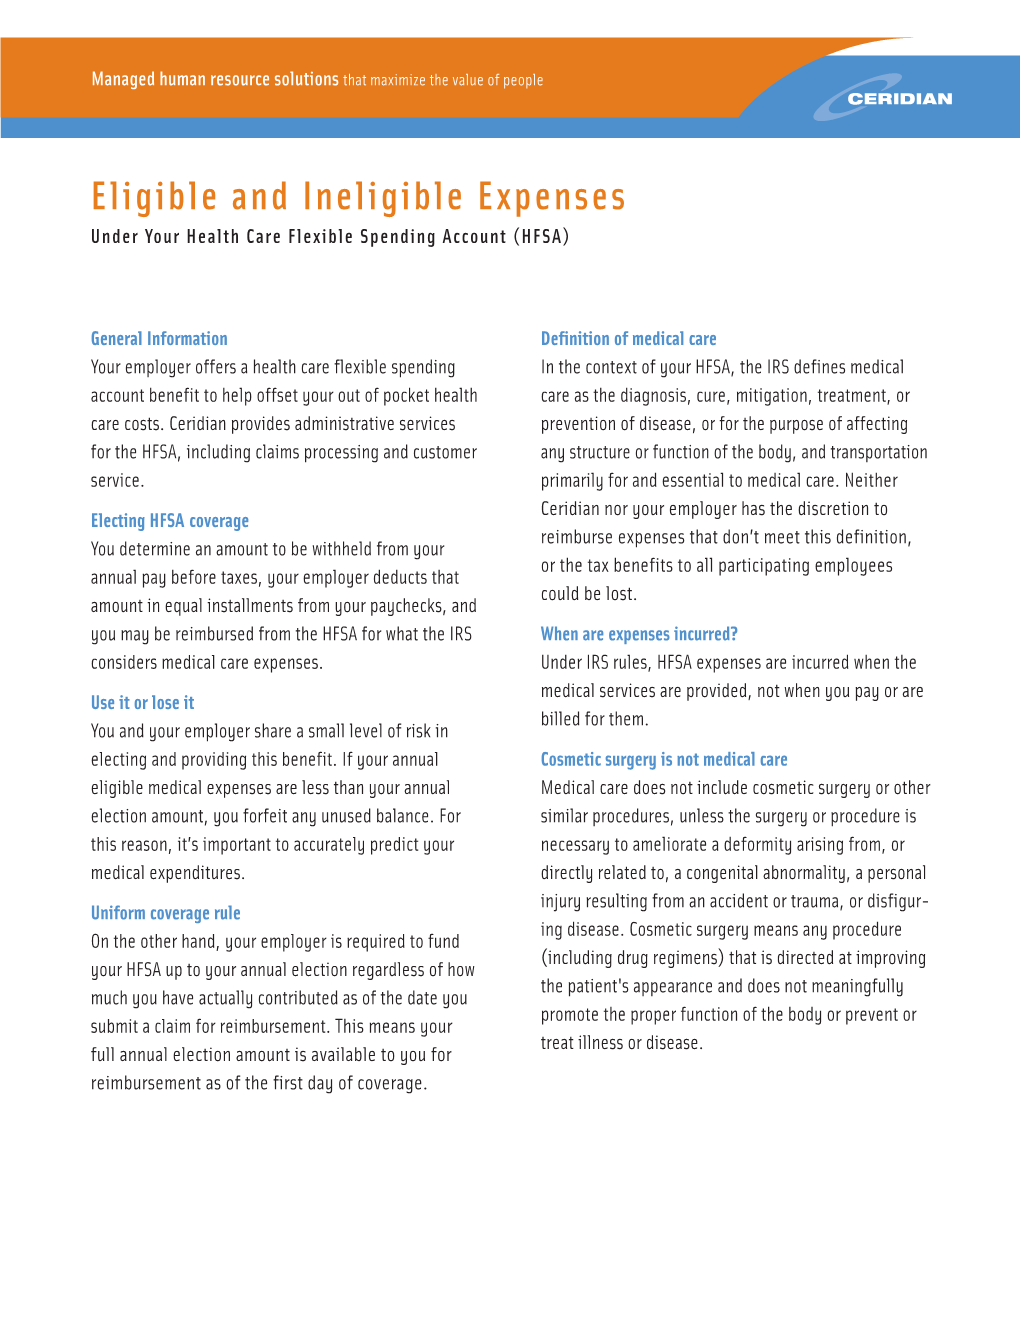 Eligible and Ineligible Expenses Under Your Health Care Flexible Spending Account (HFSA)